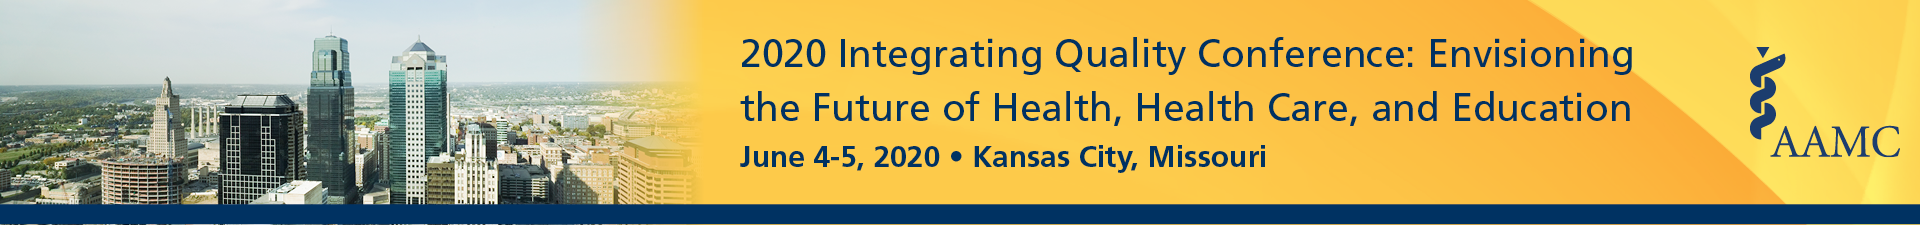 2020 Integrating Quality Conference Event Banner